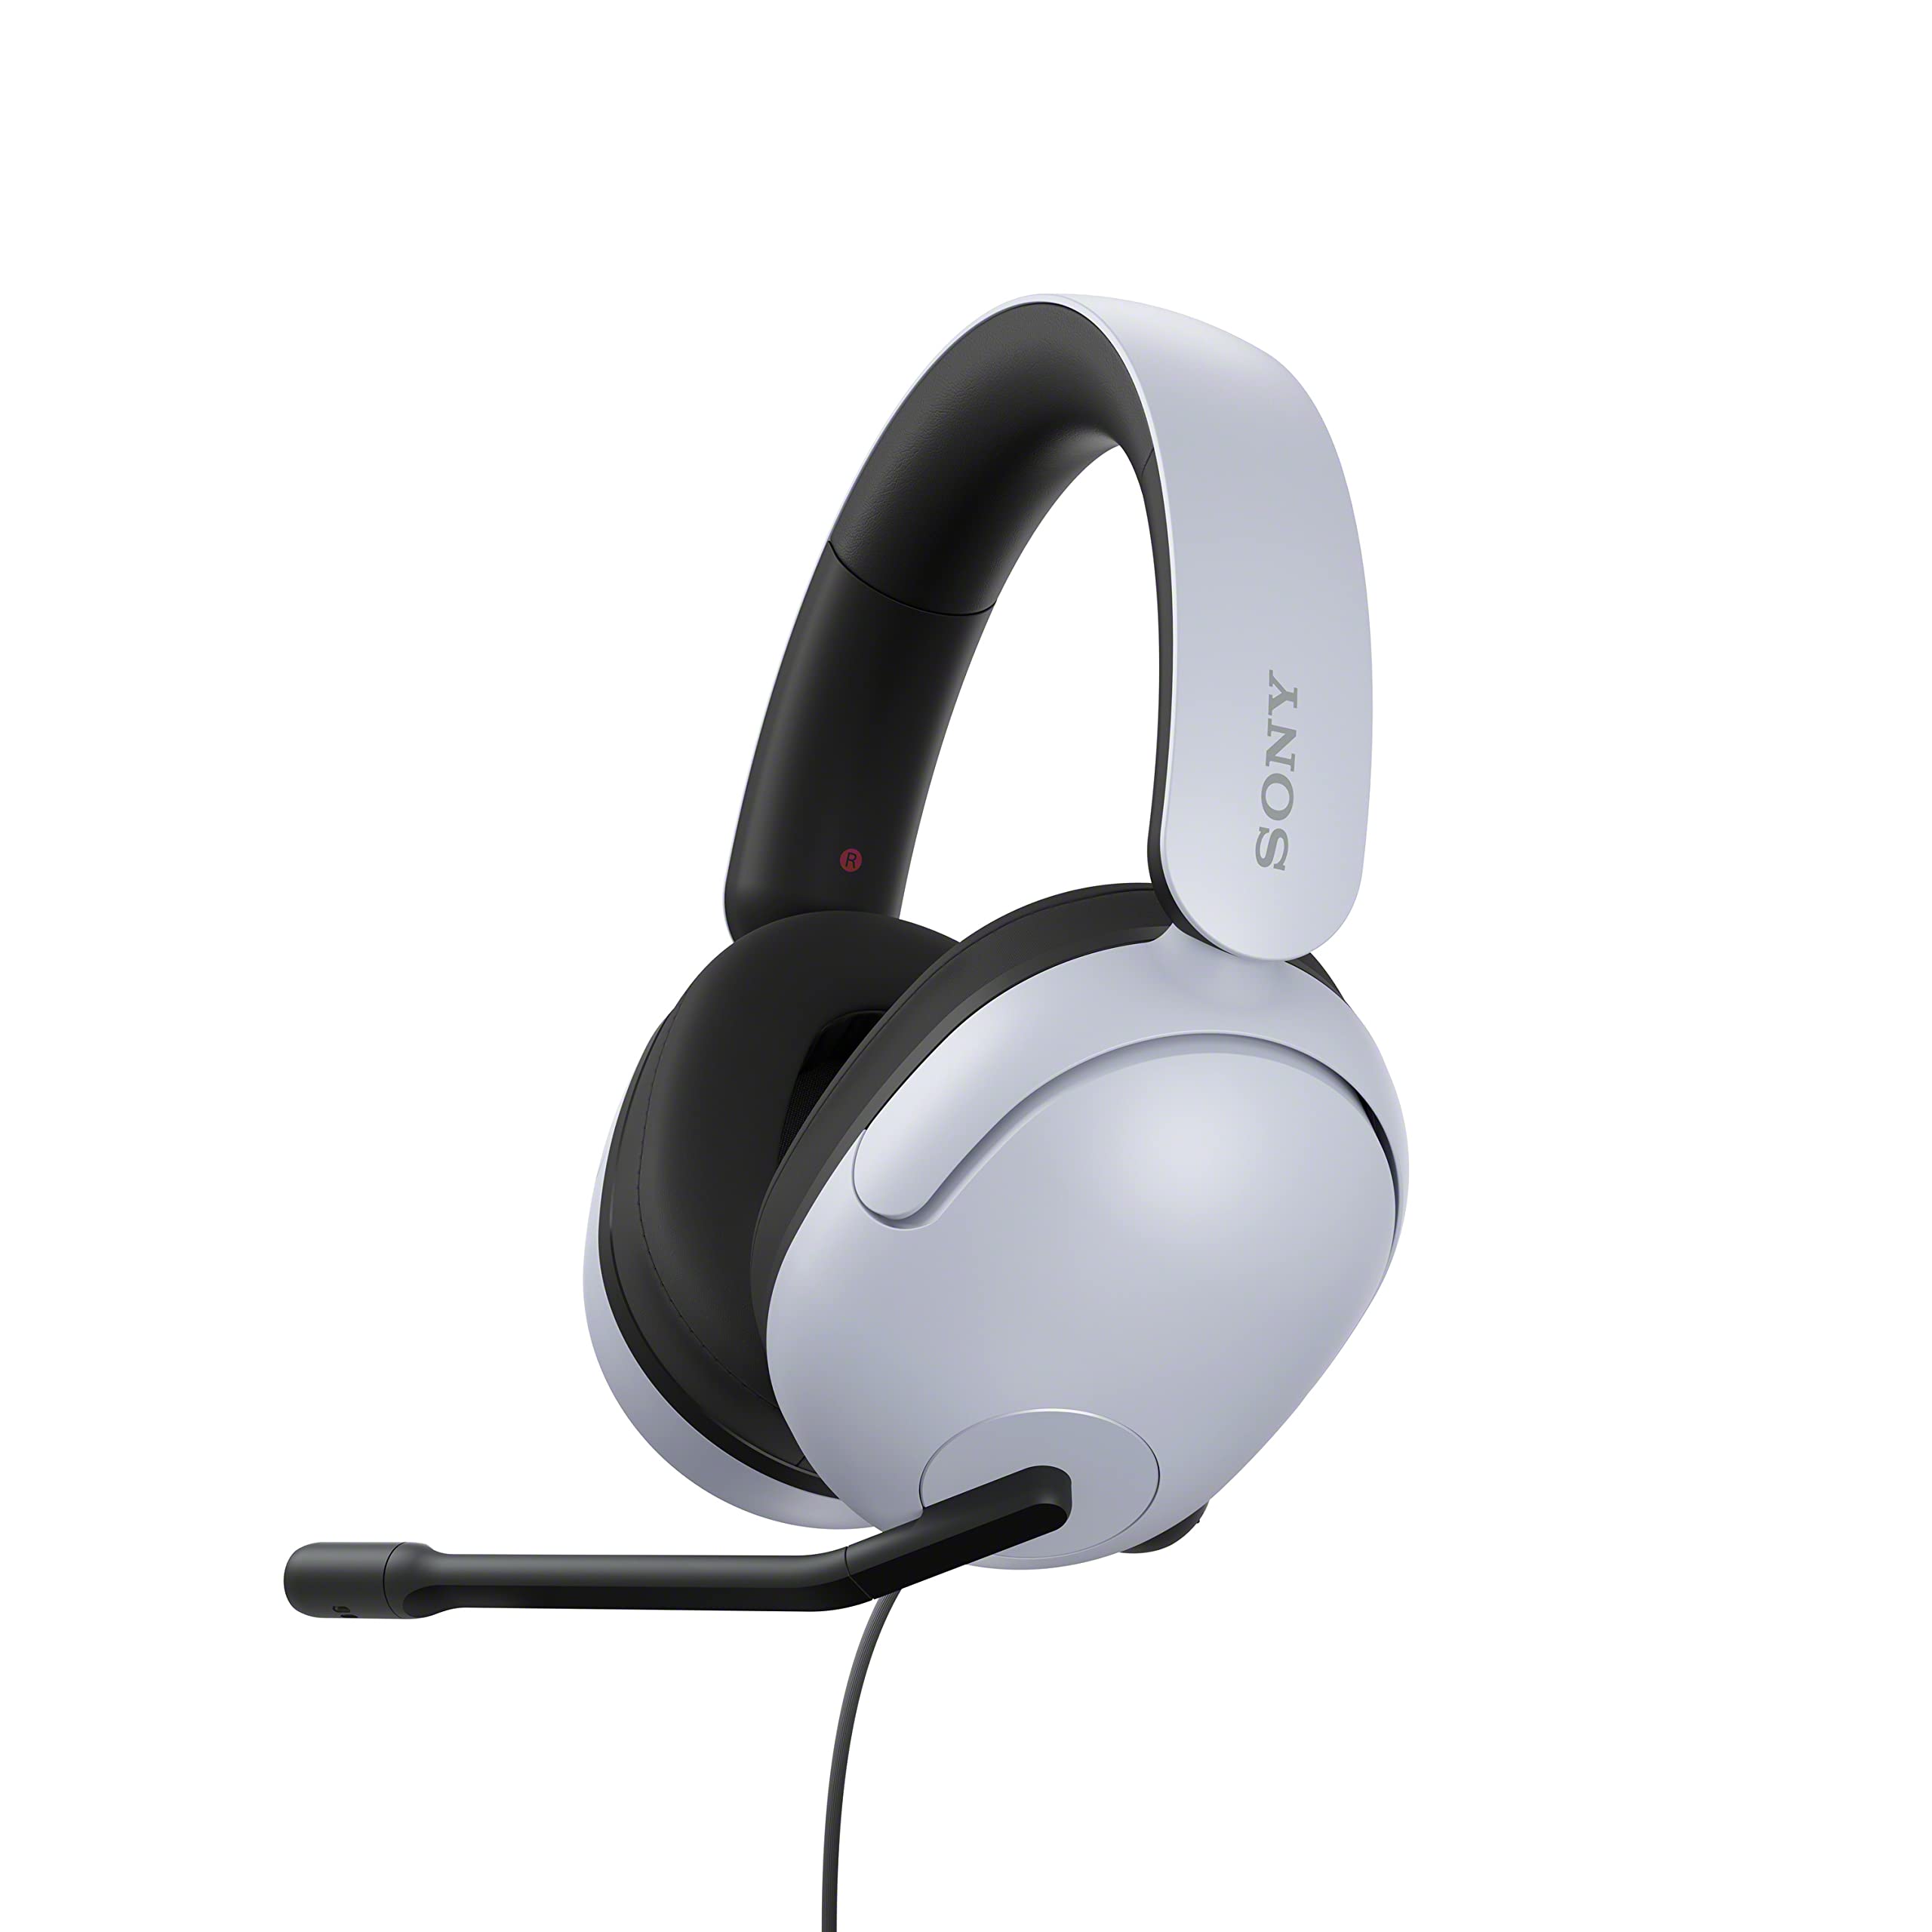 Sony-INZONE H7 Wireless Gaming Headset $148, H3 Wired Gaming Headset $58 + Free S/H